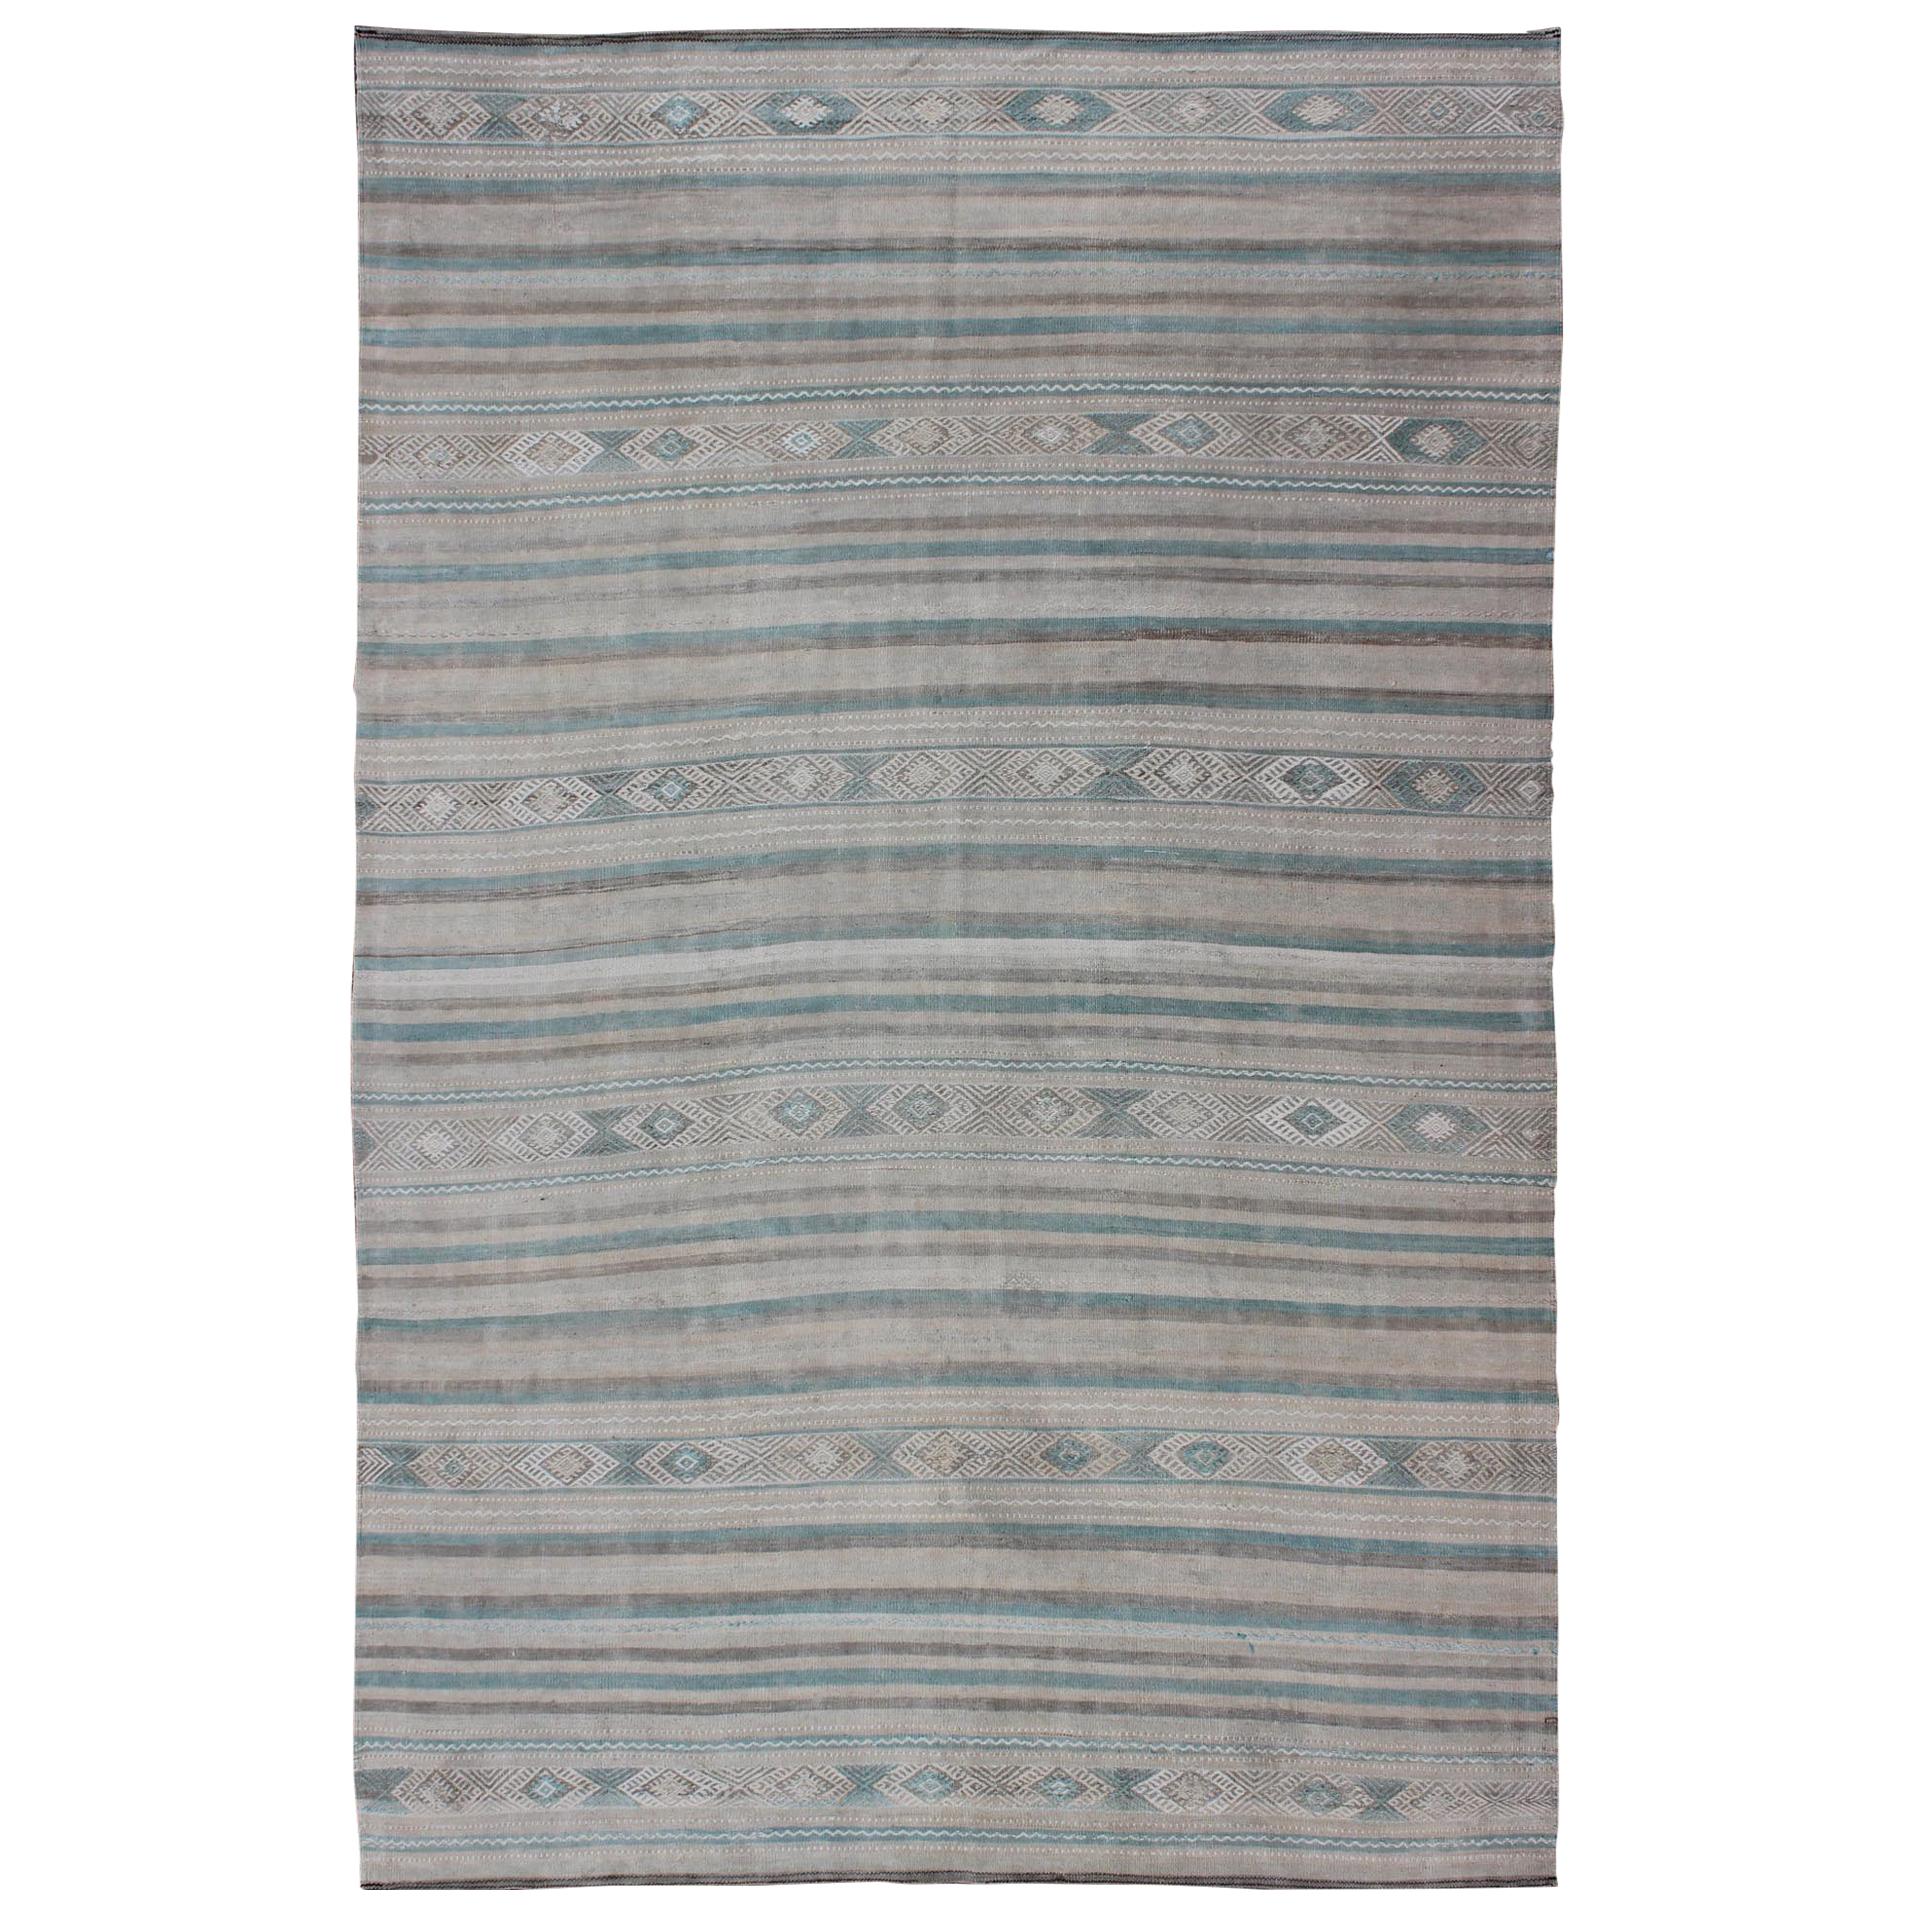 Gray, Blue Green, Taupe, and Camel Vintage Turkish Kilim with Geometric For Sale